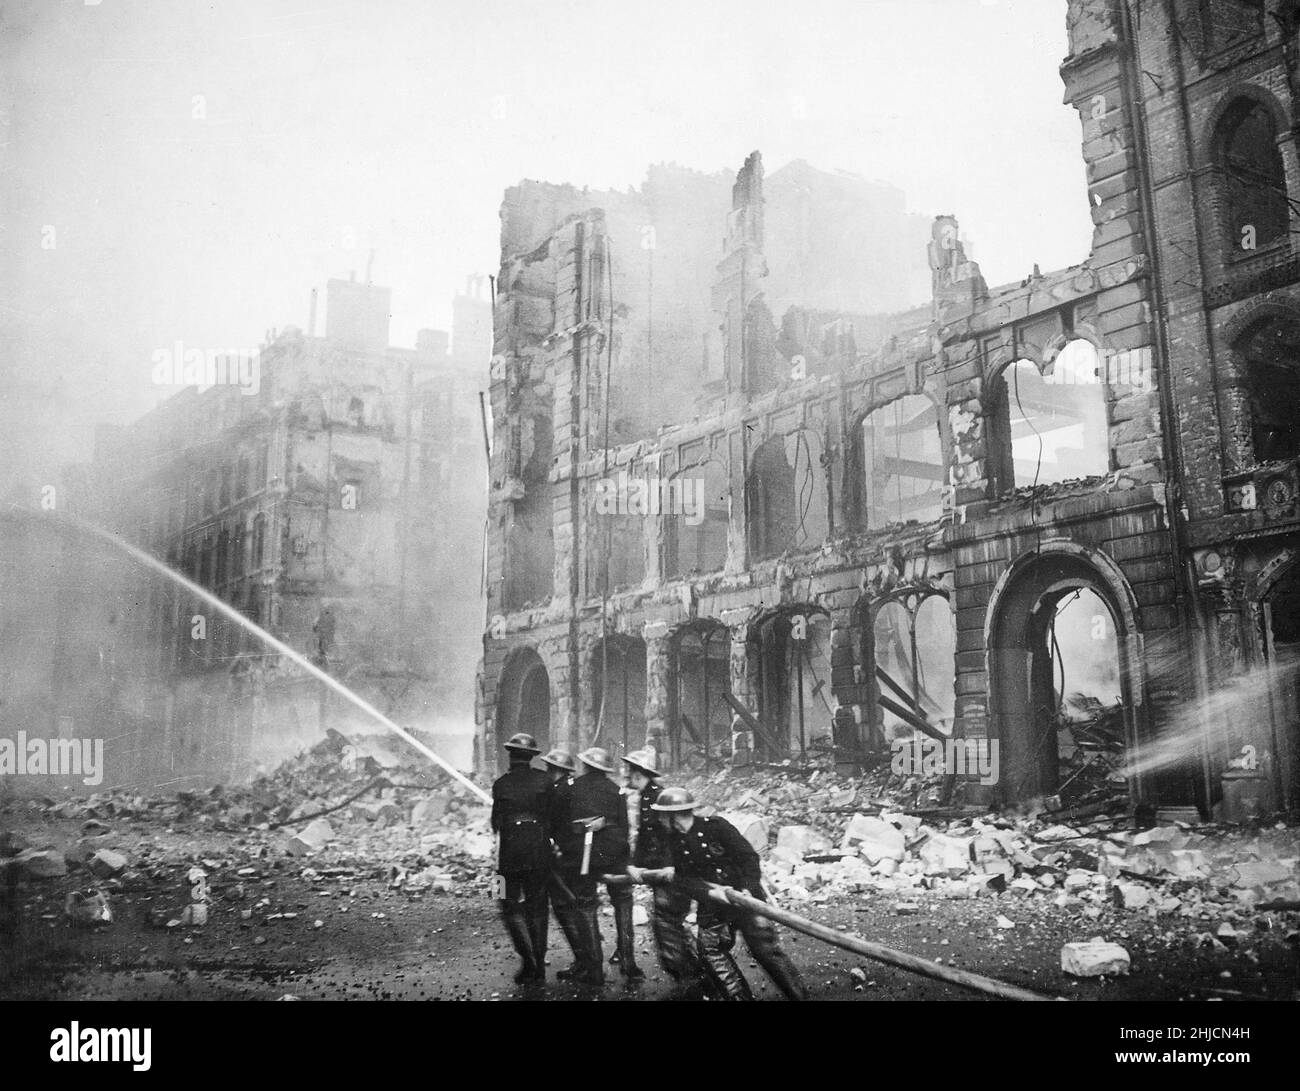 Firemen at work in a bomb-damaged street in London after a Saturday night Blitz raid, circa 1941. The Blitz was a German bombing campaign against the United Kingdom in 1940 and 1941, during the Second World War. The term comes from Blitzkrieg, meaning 'lightning war' in German. Stock Photo